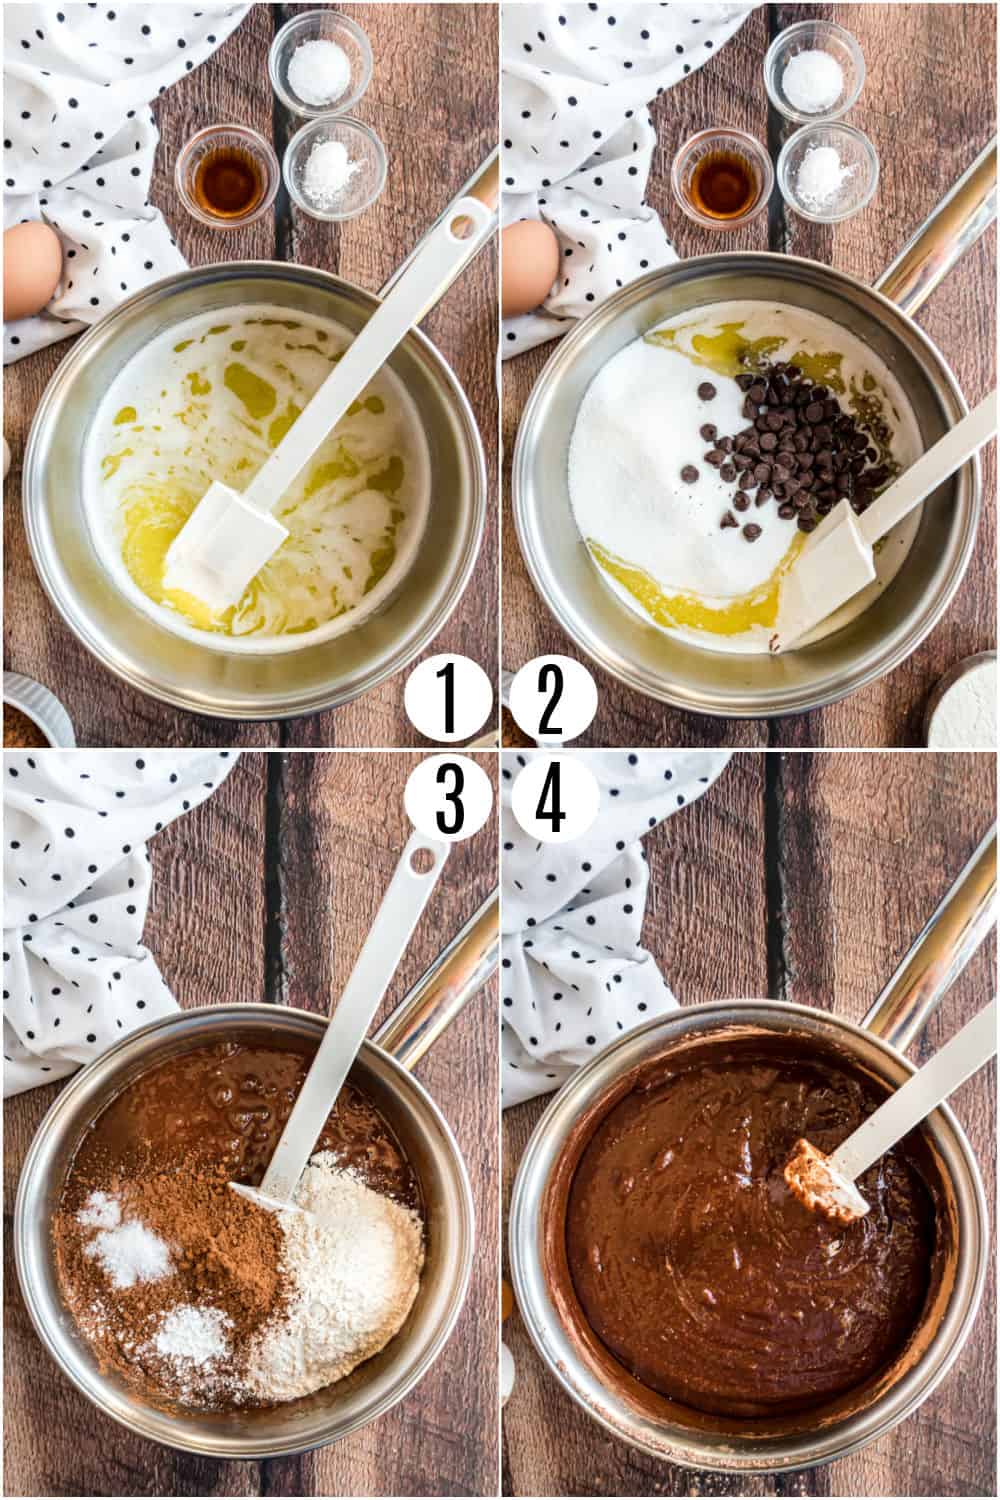 Step by step photos showing how to make brownies from scratch in one pan.